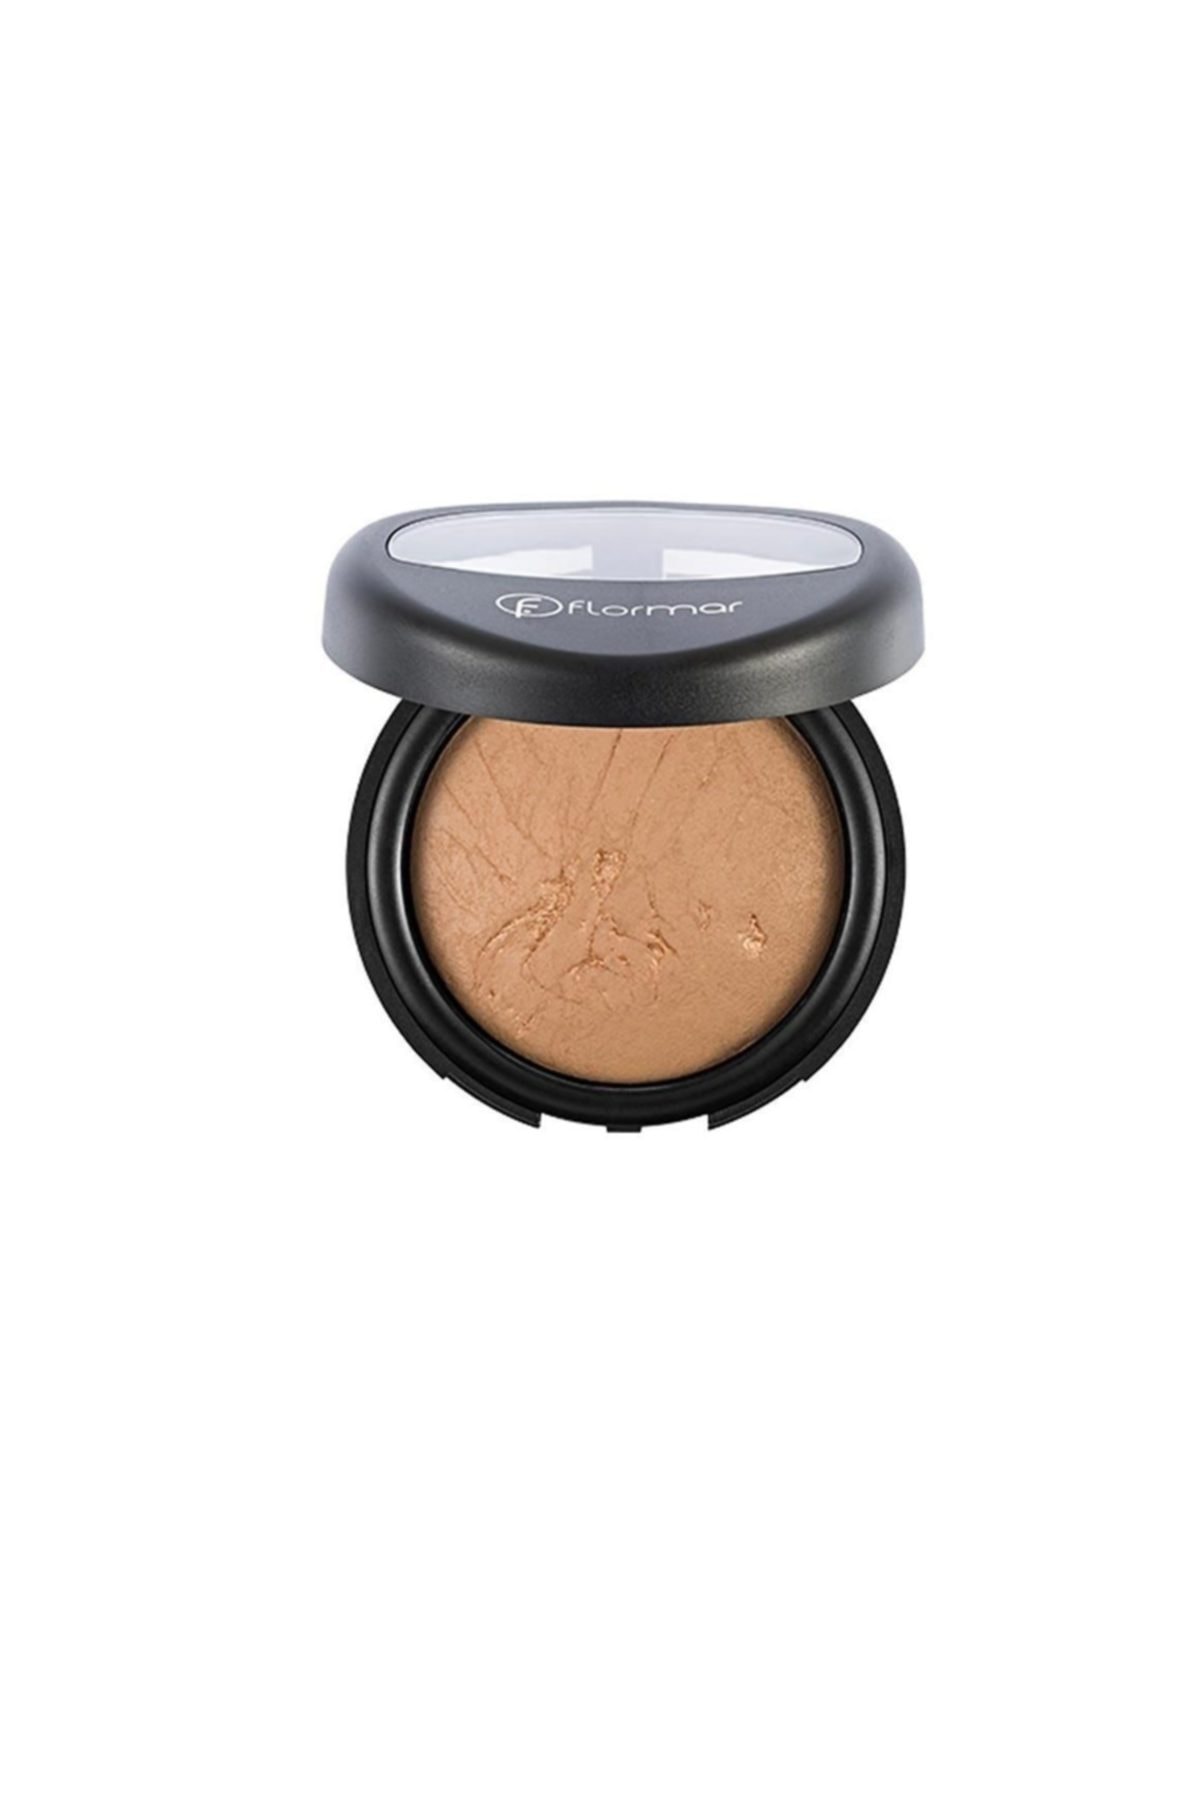 Flormar Terracotta Powder Pudra No 21 Beige With gold 8690604131211